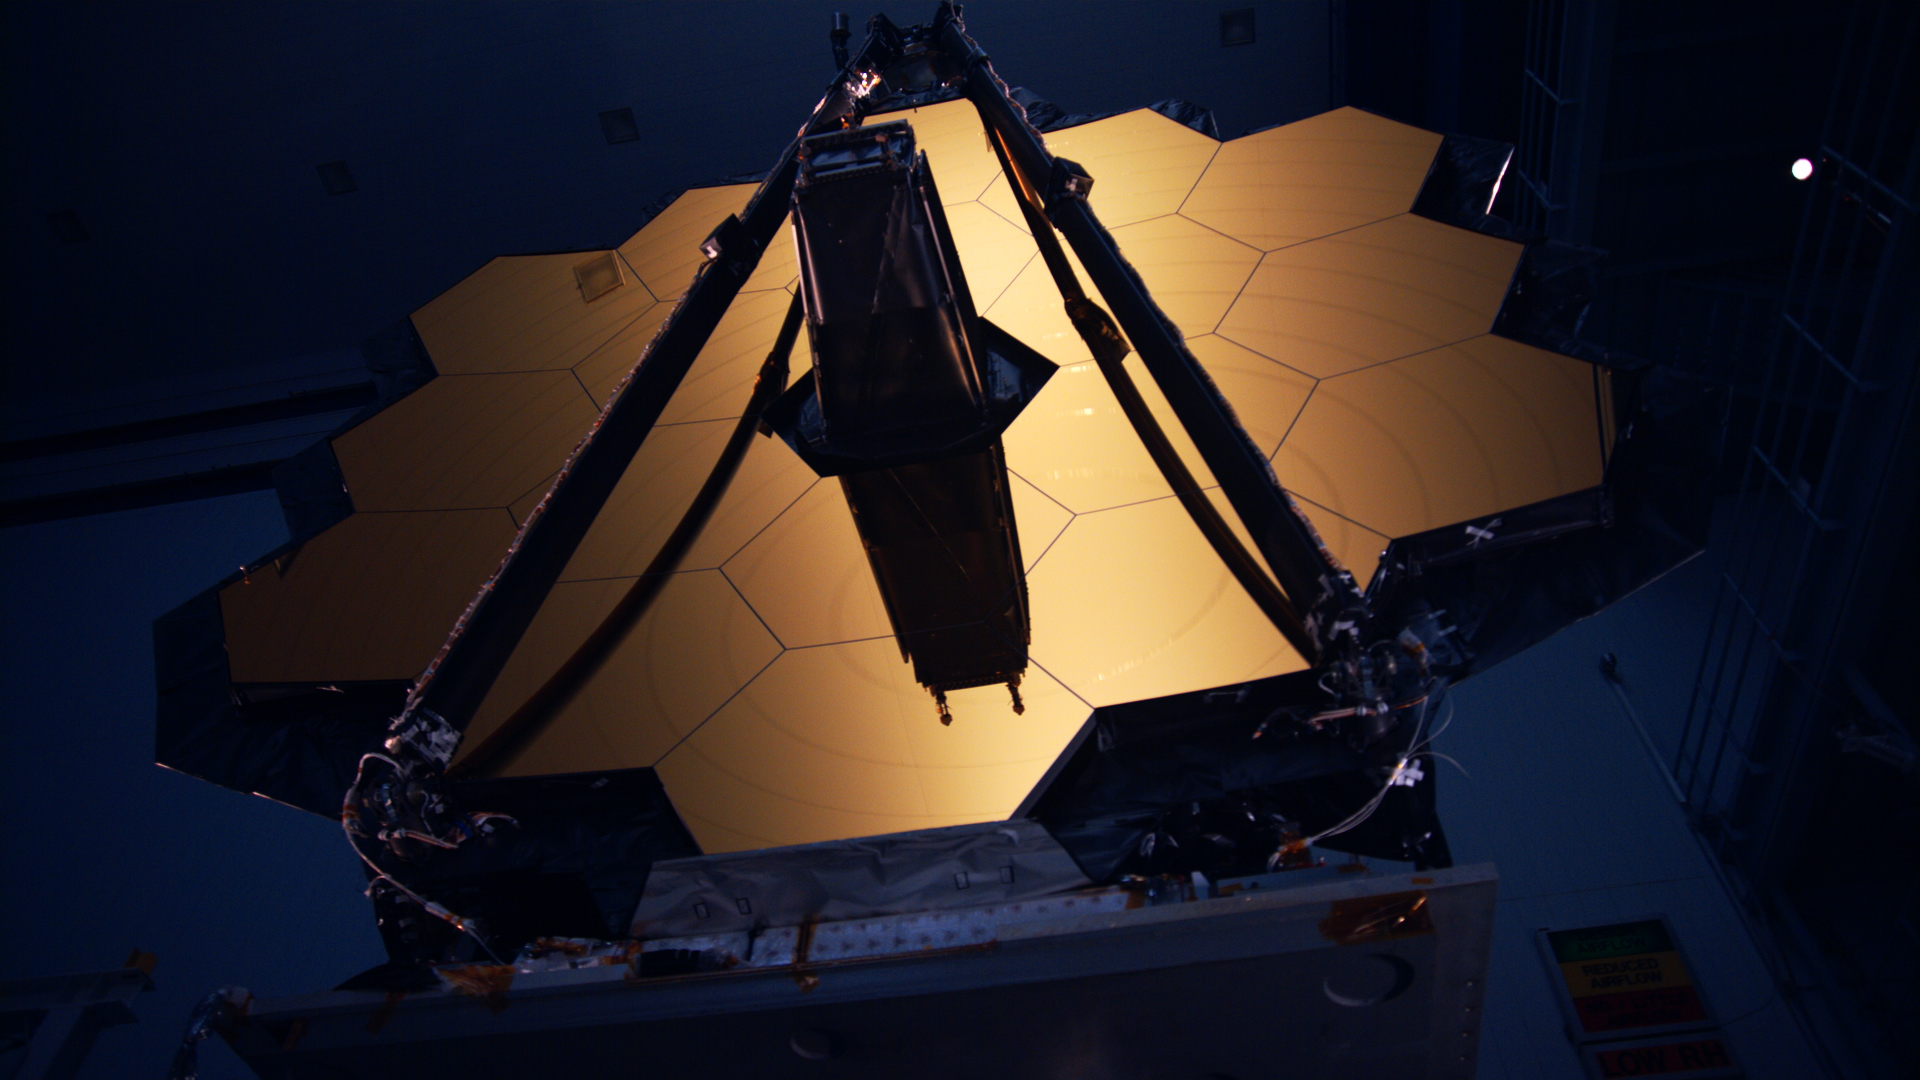 The James Webb Space Telescope will be the world's premier space science observatory. Webb will solve mysteries of our solar system, look beyond to distant worlds around other stars, and probe the mysterious structures and origins of our universe and our place in it. Webb is an international project led by NASA with its partners, the European Space Agency (ESA) and the Canadian Space Agency (CSA).  